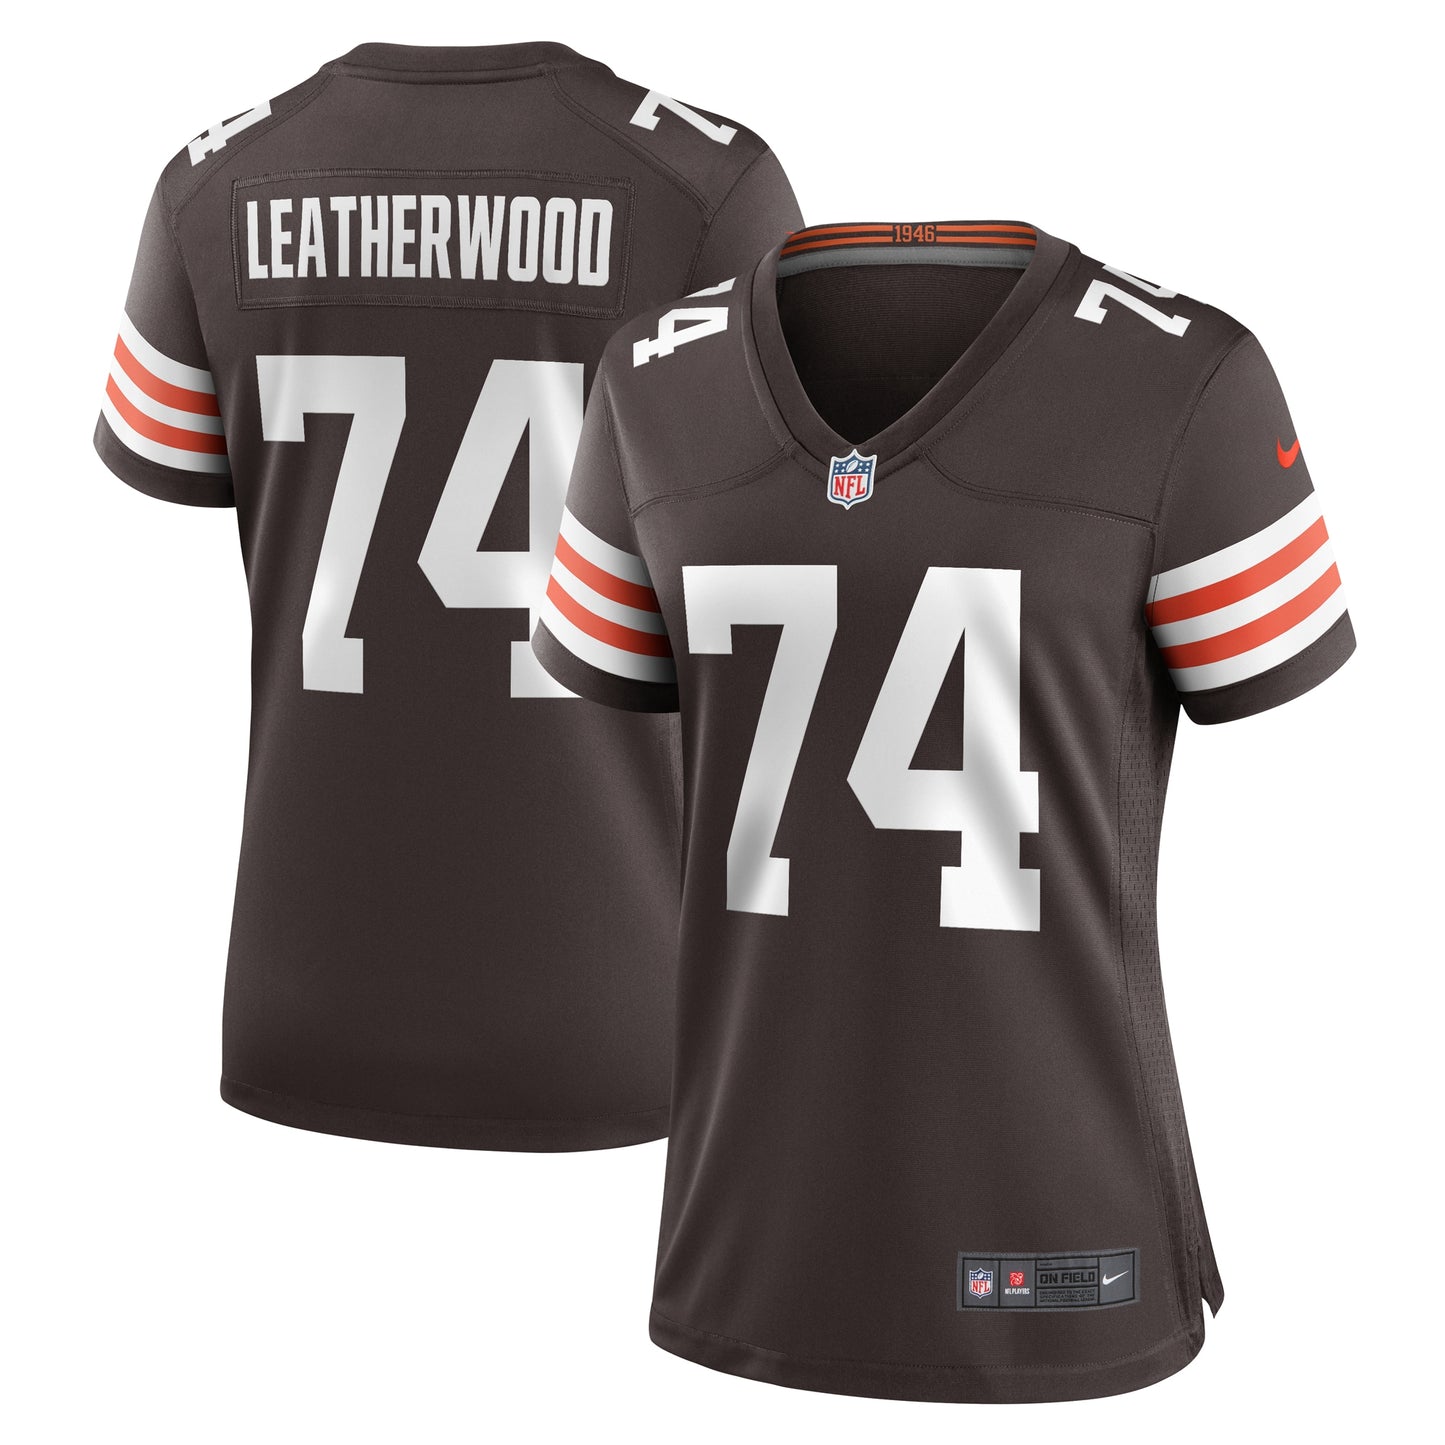 Alex Leatherwood Cleveland Browns Nike Women's Team Game Jersey - Brown